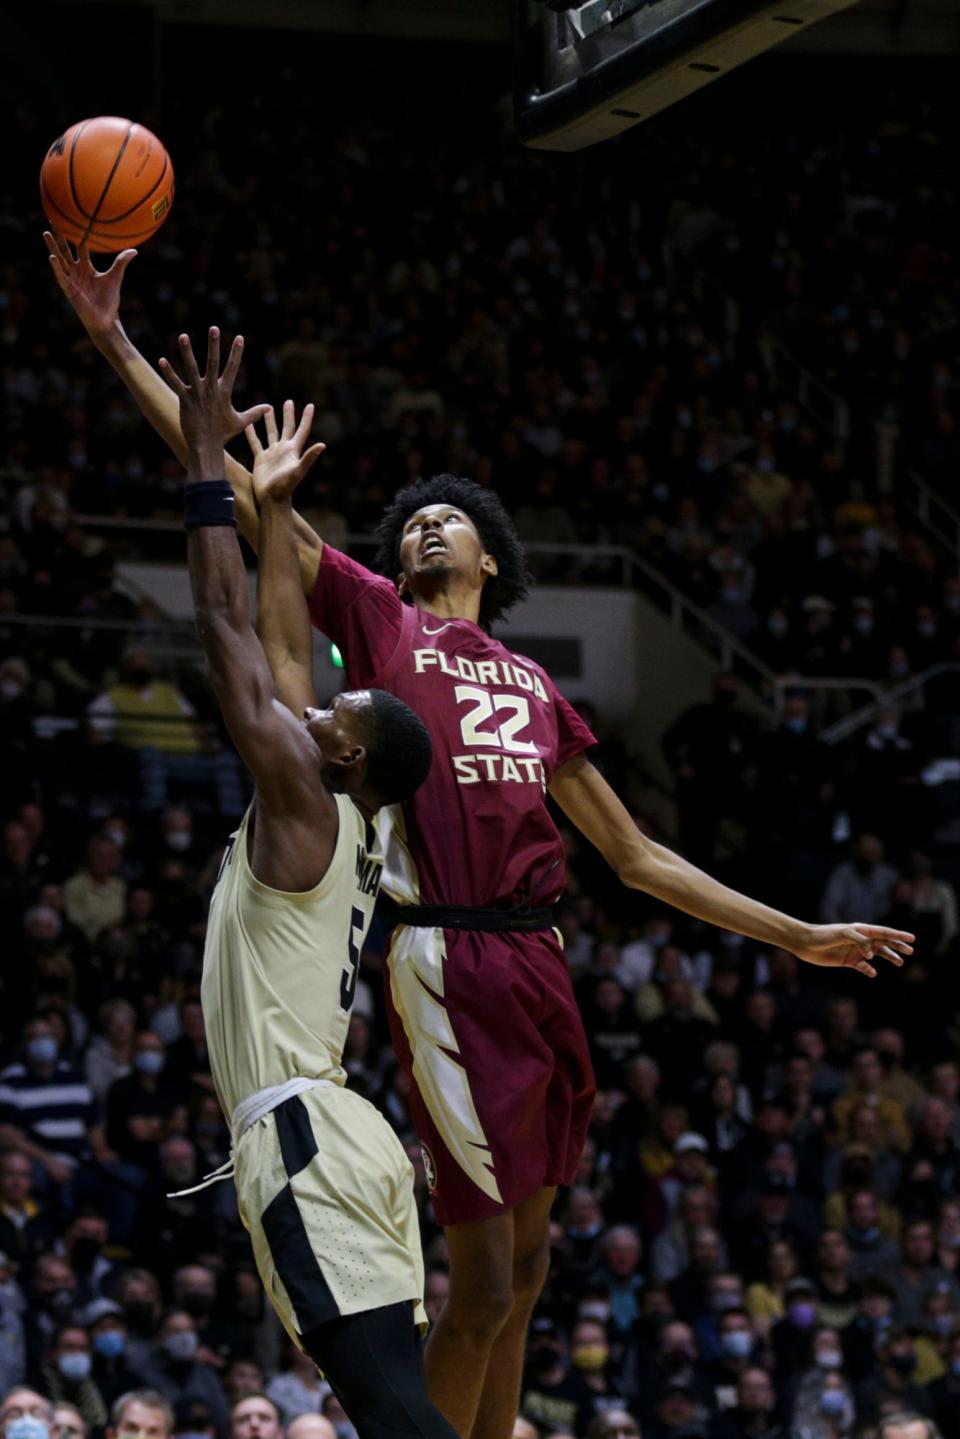 Florida State forward John Butler (22) grabs the rebound above Purdue guard Brandon Newman (5) during the first half of an NCAA men's basketball game, Tuesday, Nov. 30, 2021 at Mackey Arena in West Lafayette.